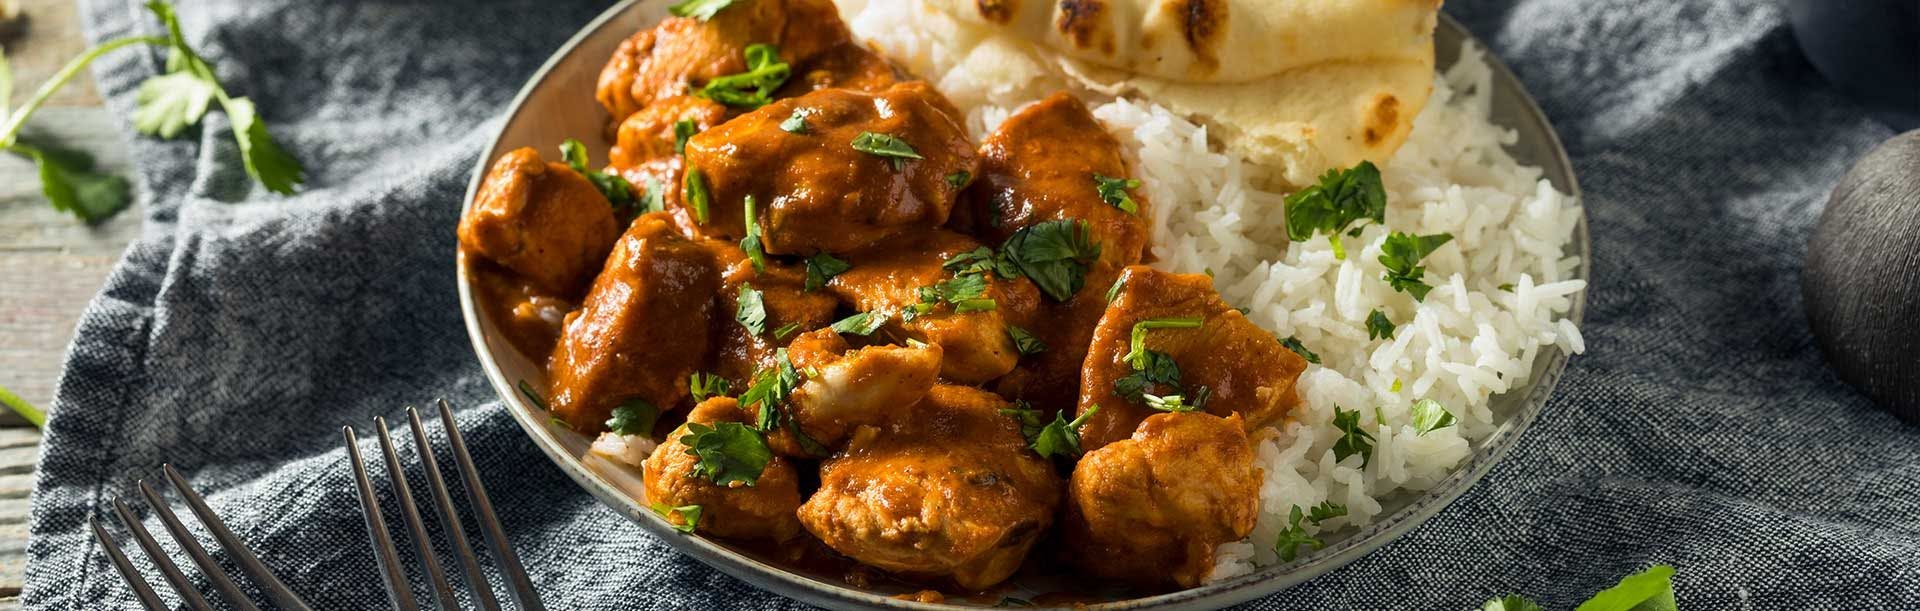 Spice Lodge Kitchen (Bishops Cleeve) - Indian Restaurant and Takeaway ...